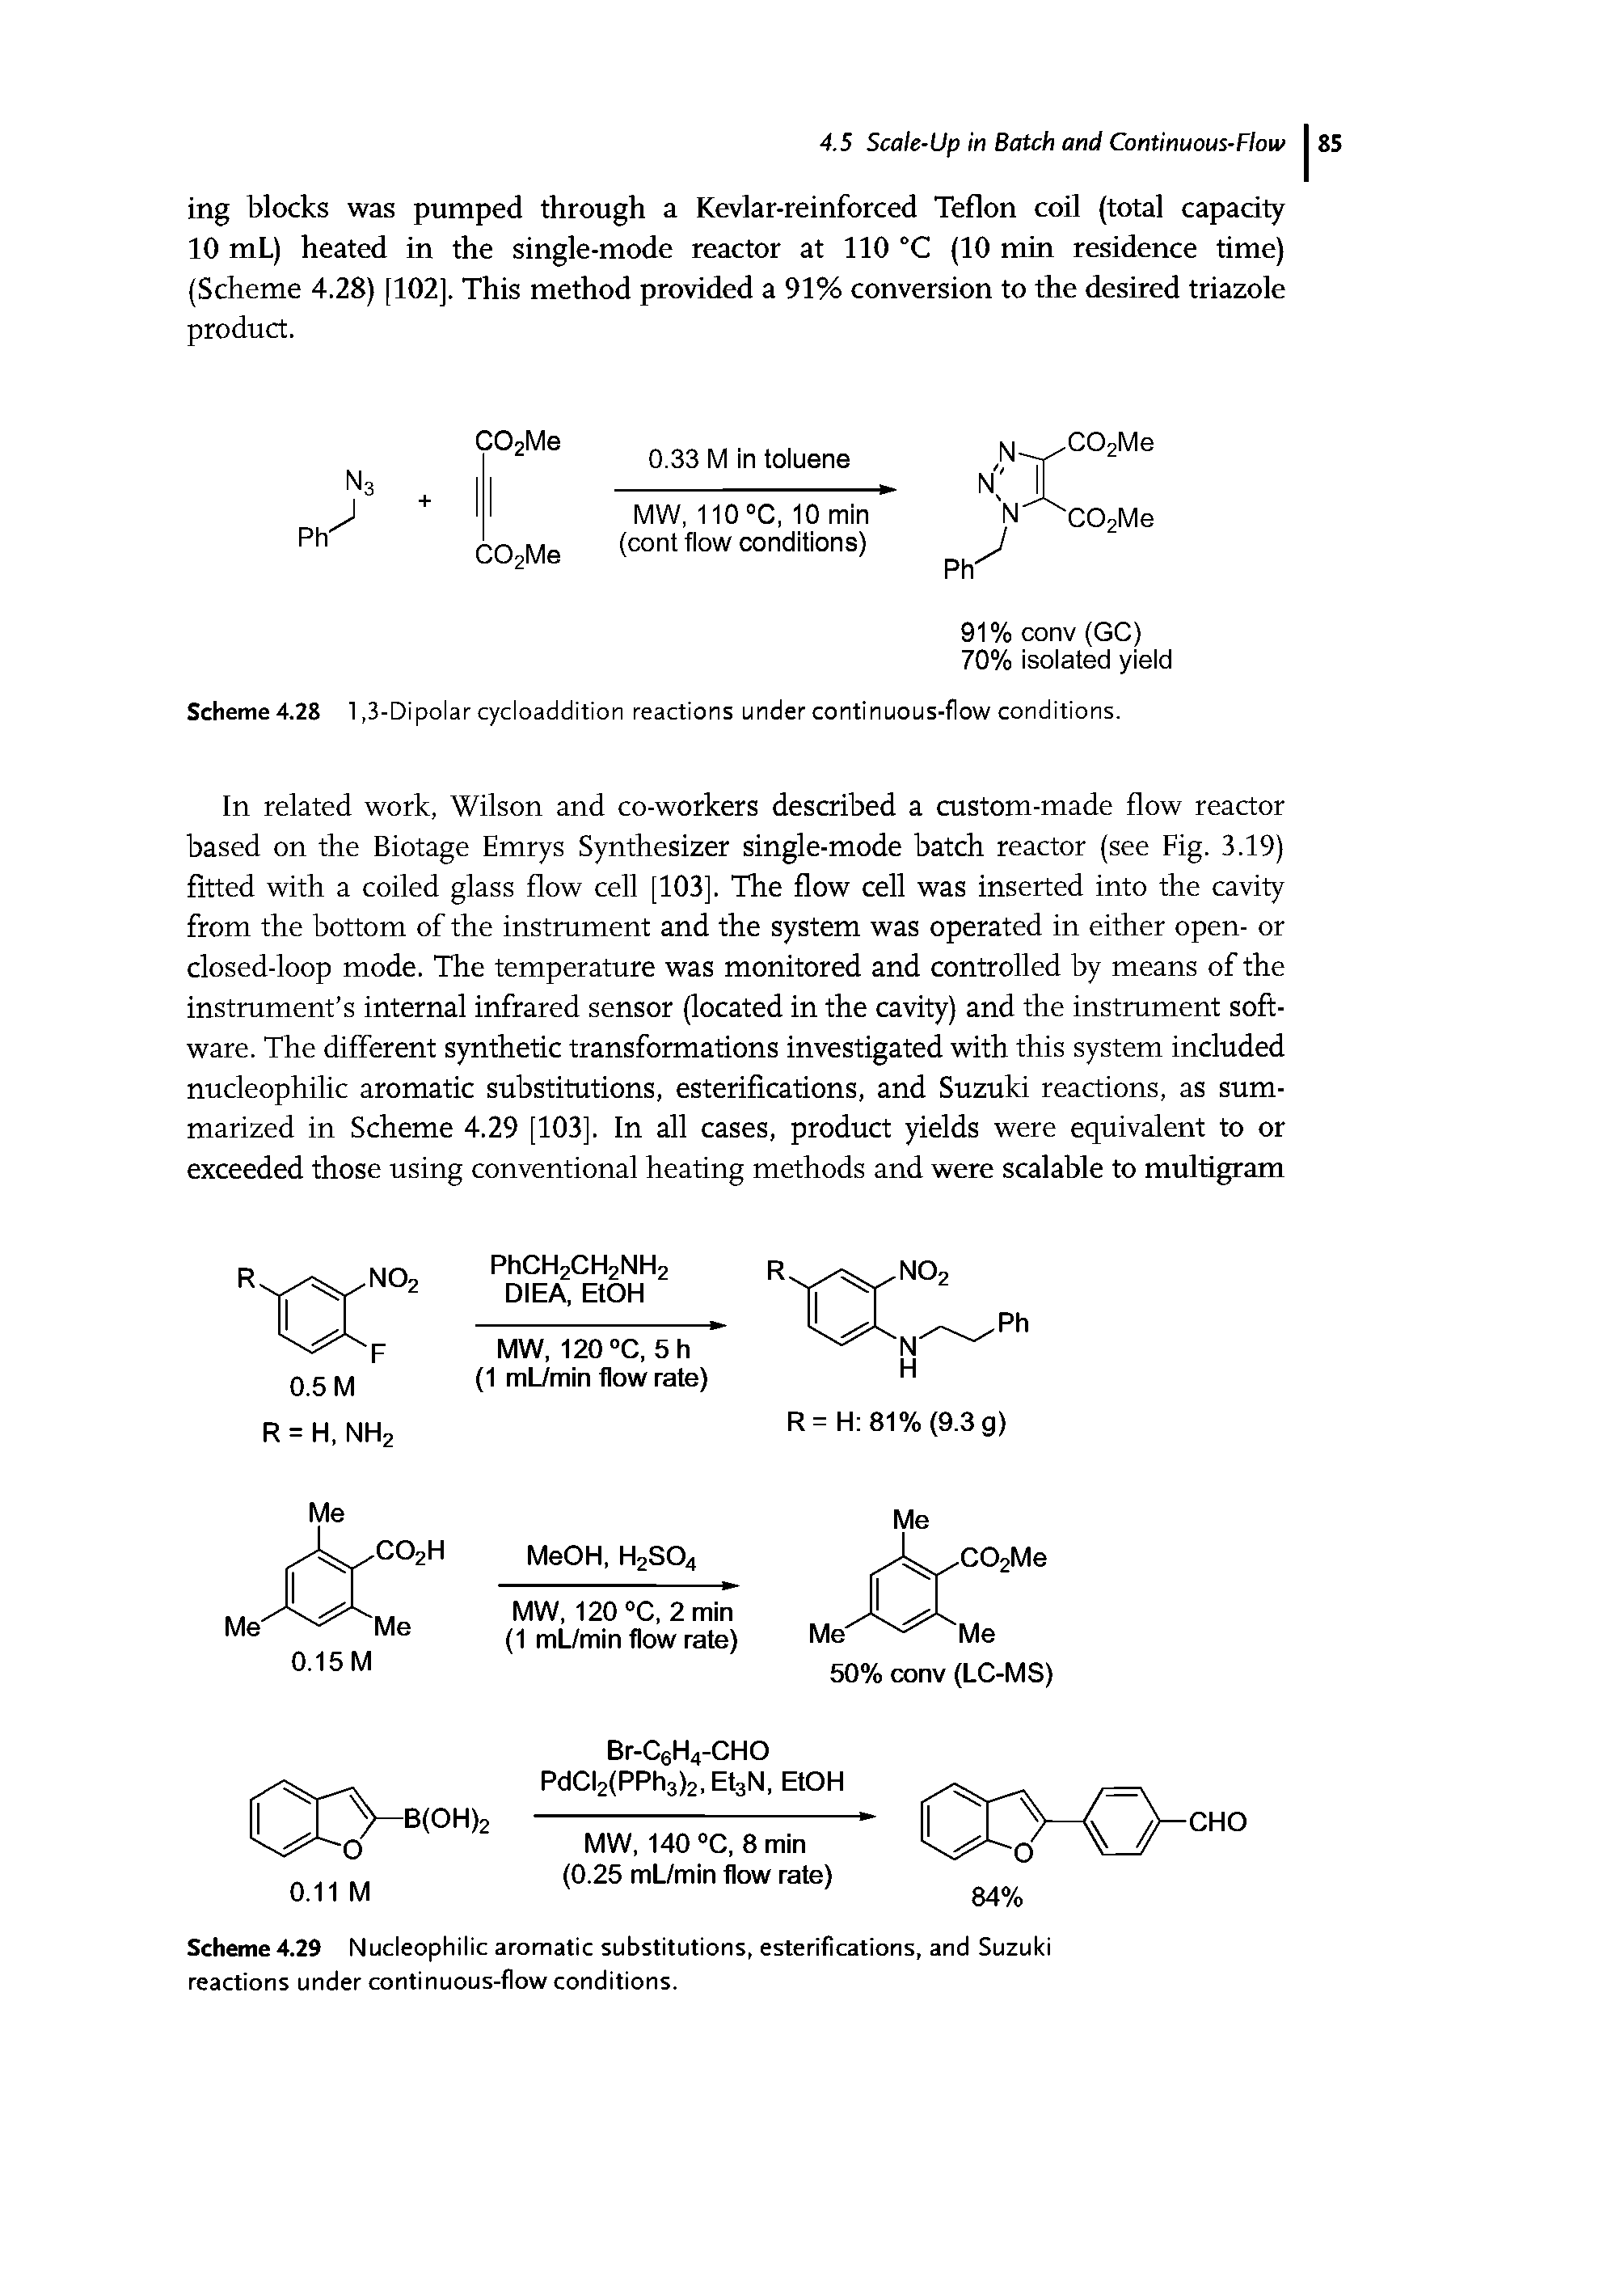 Scheme 4.28 1,3-Dipolar cycloaddition reactions under continuous-flow conditions.